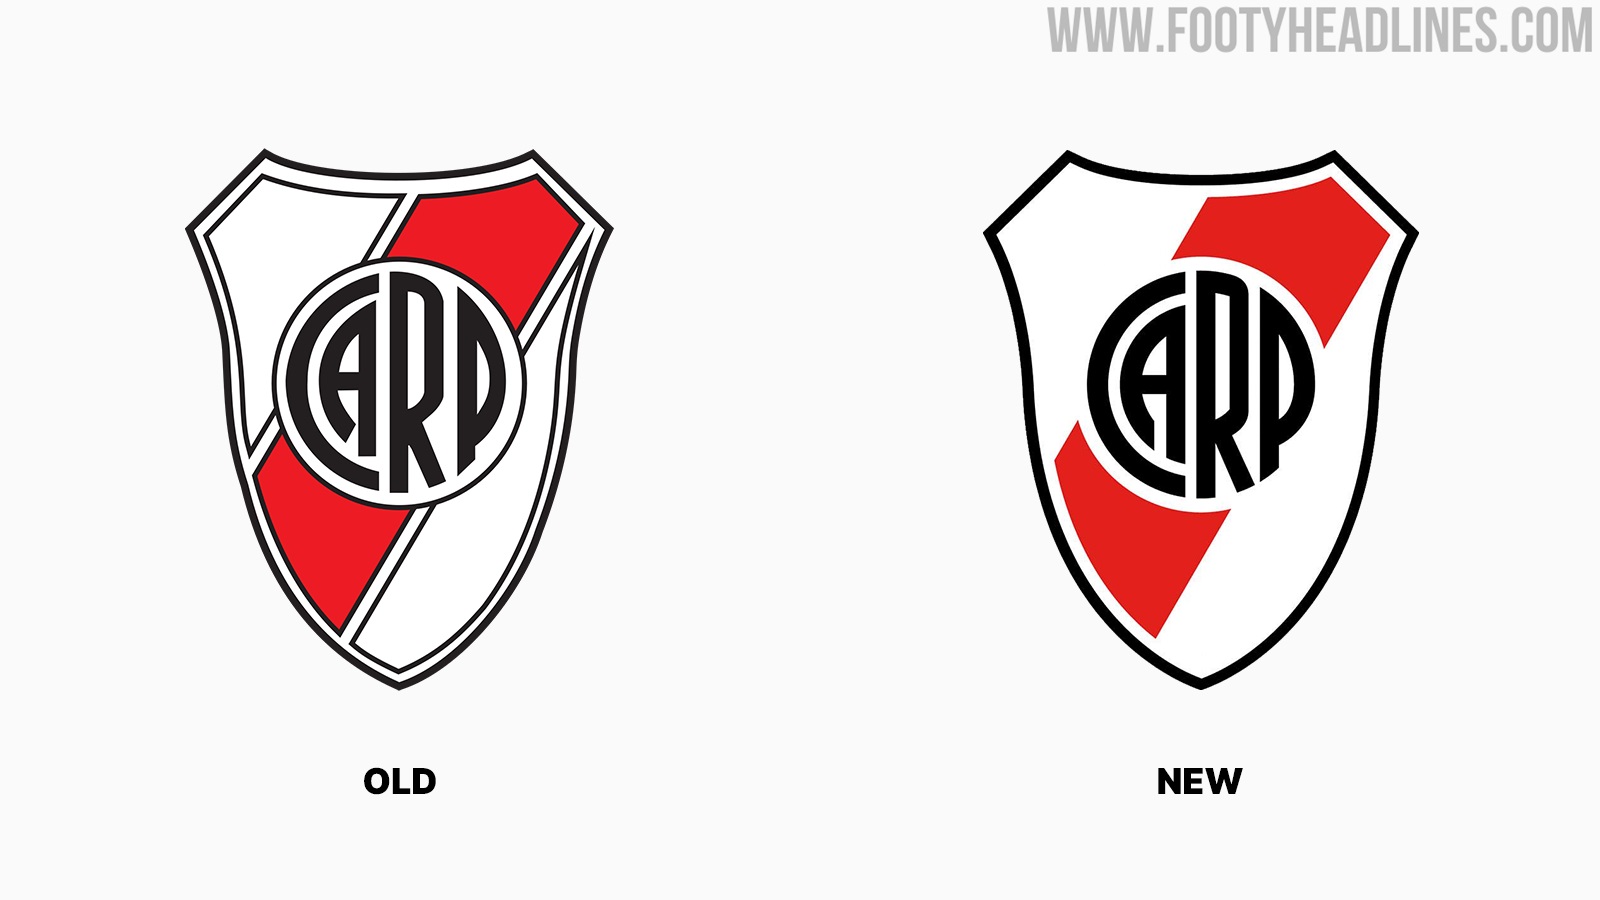 New River Plate Logo Unveiled - Footy Headlines